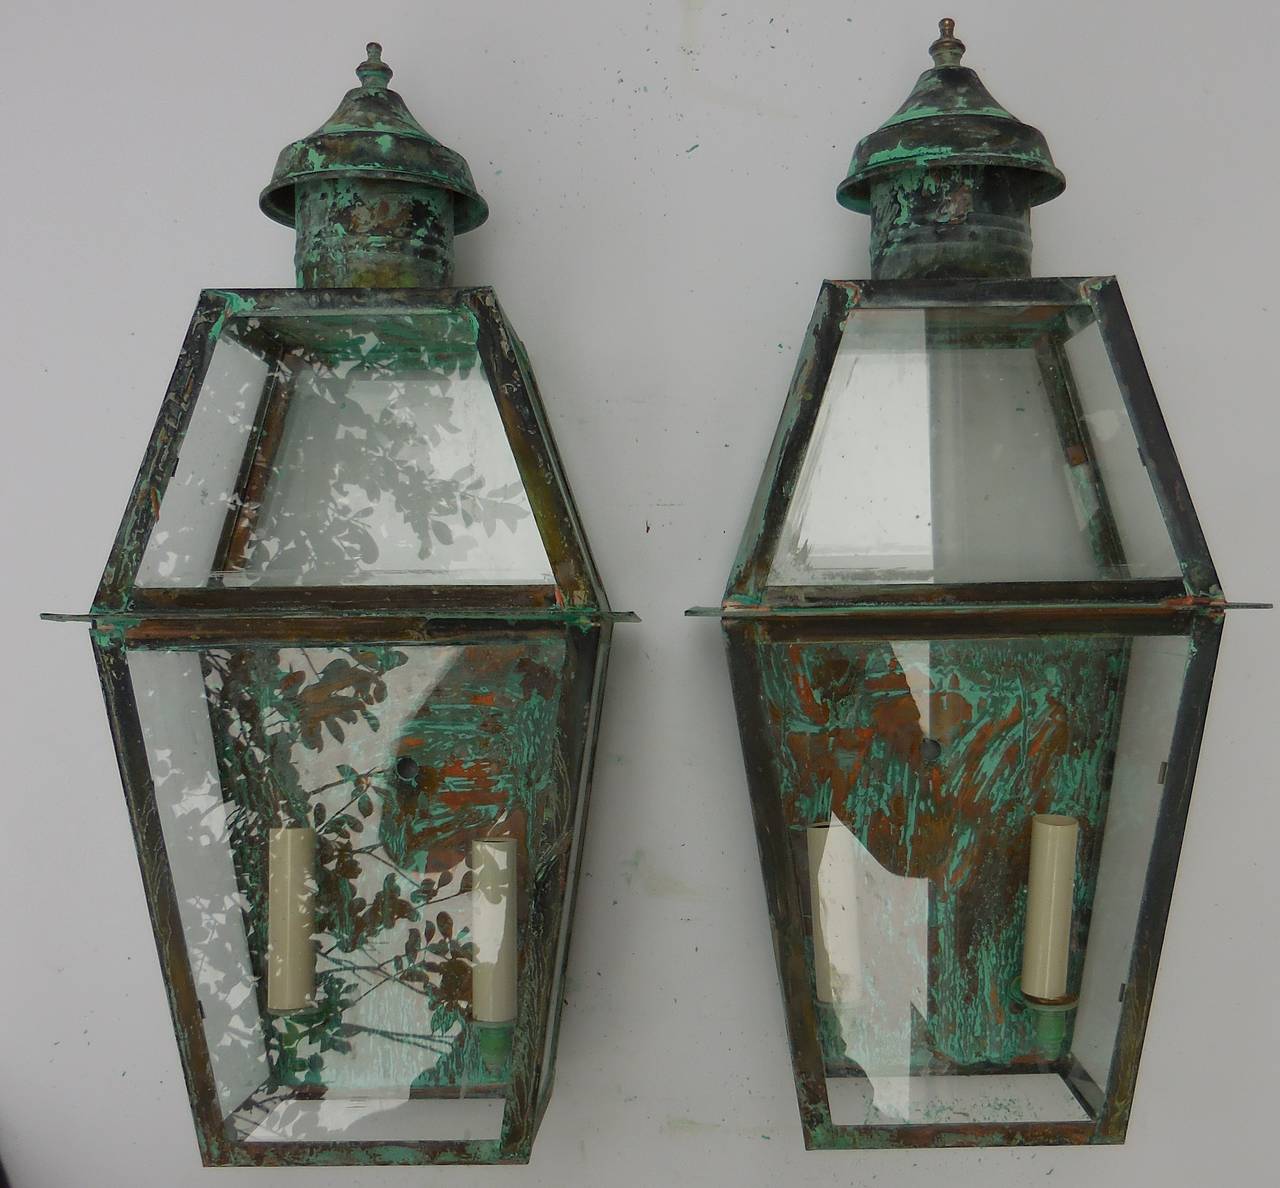 Pair of architectural wall lanterns, made of copper, with two 60/watt light each.
Electrified and ready to light. Suited for dry or wet location. UL approved.